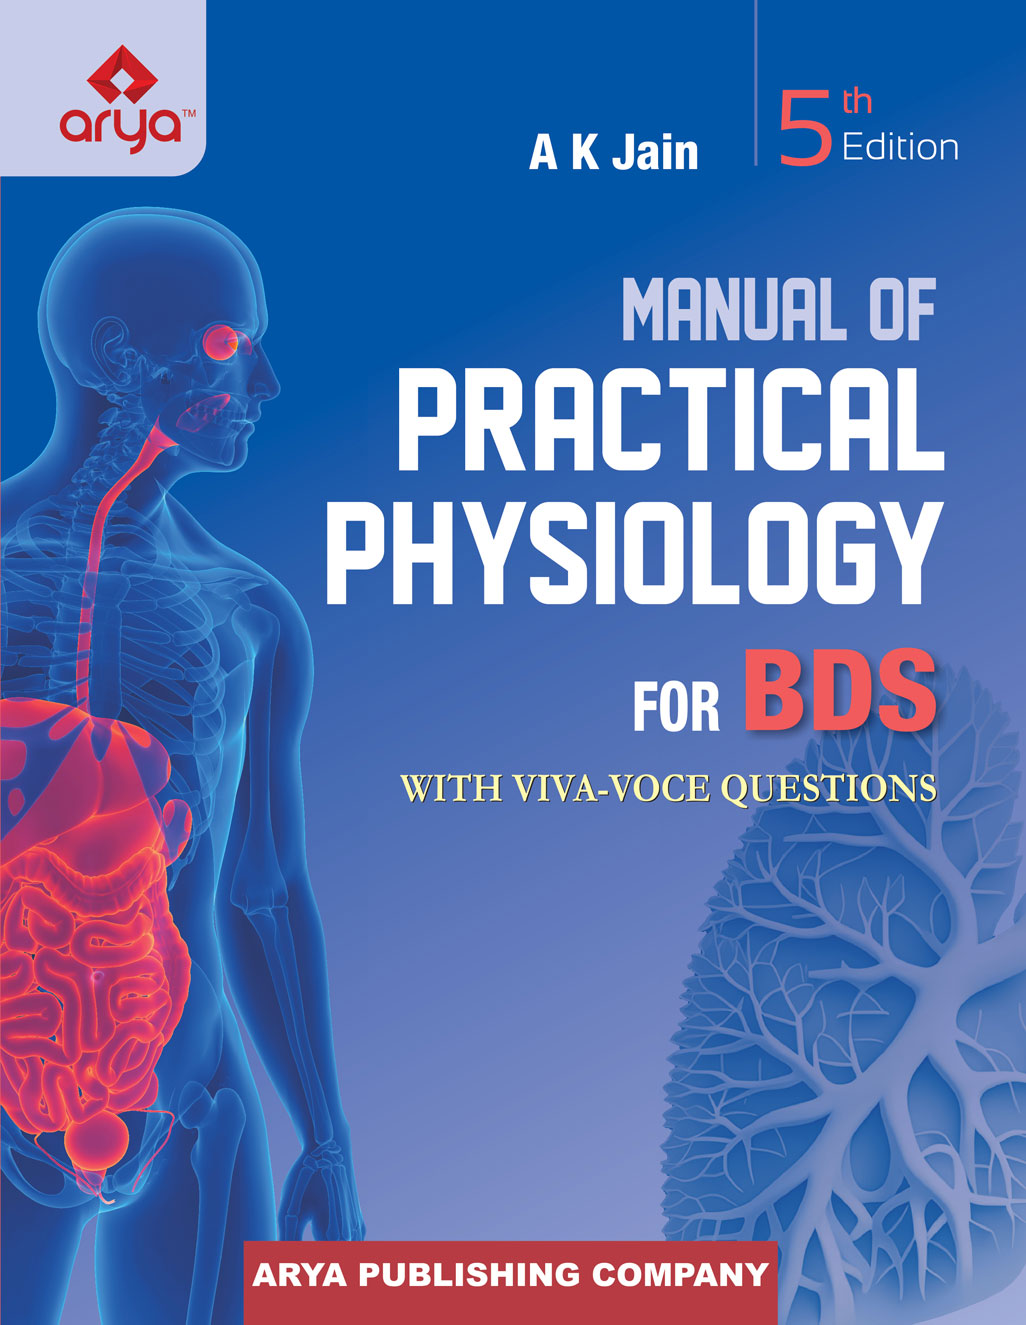 Manual of Practical Physiology for BDS 